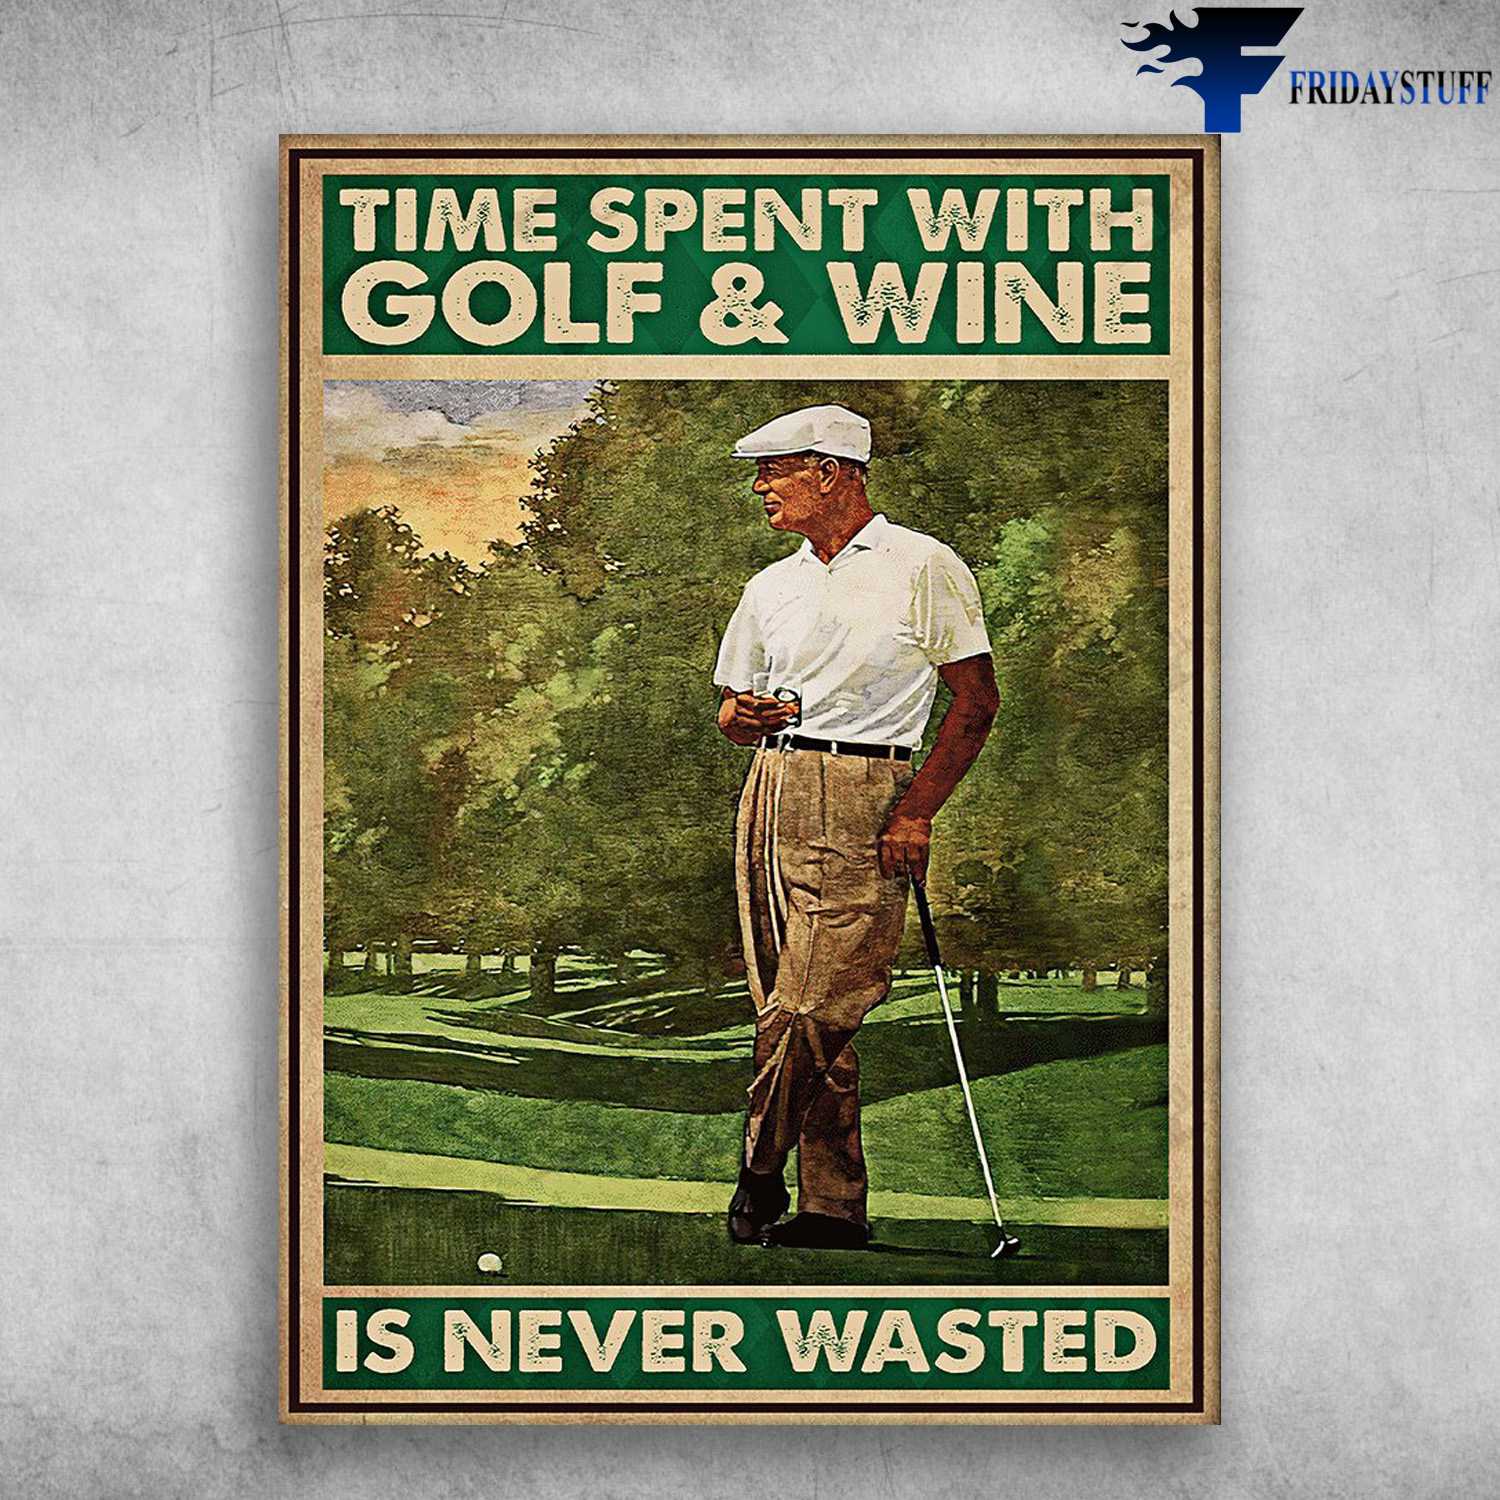 Old Man Plays Golf - Time Spent With Golf And Wine, Is Never Wasted, Drink Wine